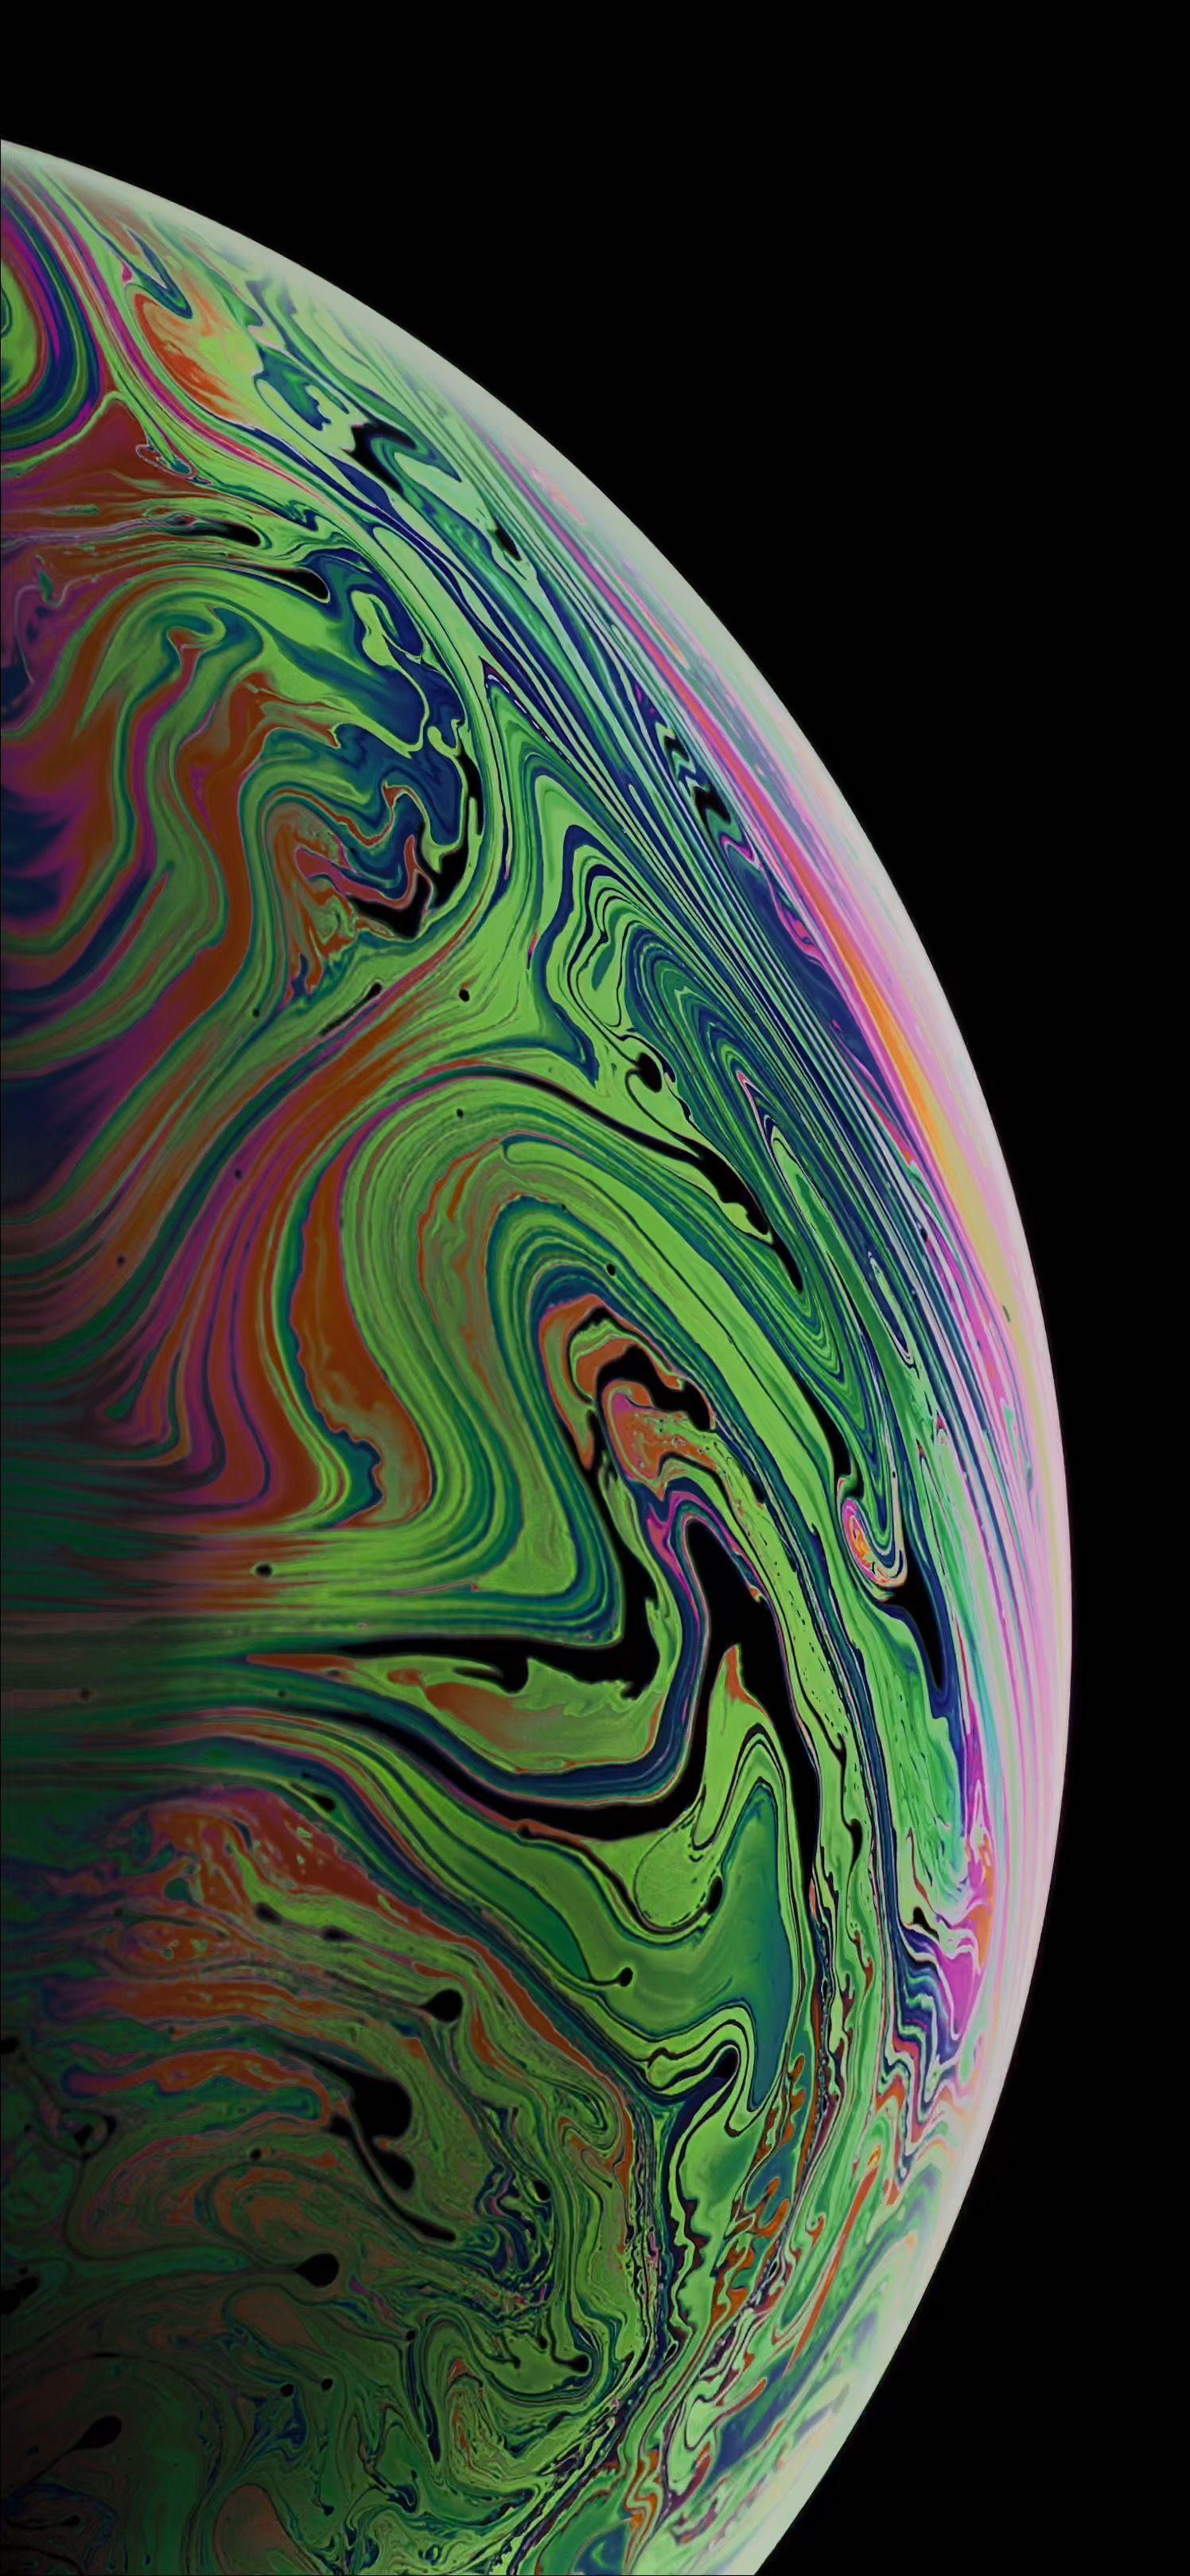 Download iPhone XS and XS Max wallpaper from the Park